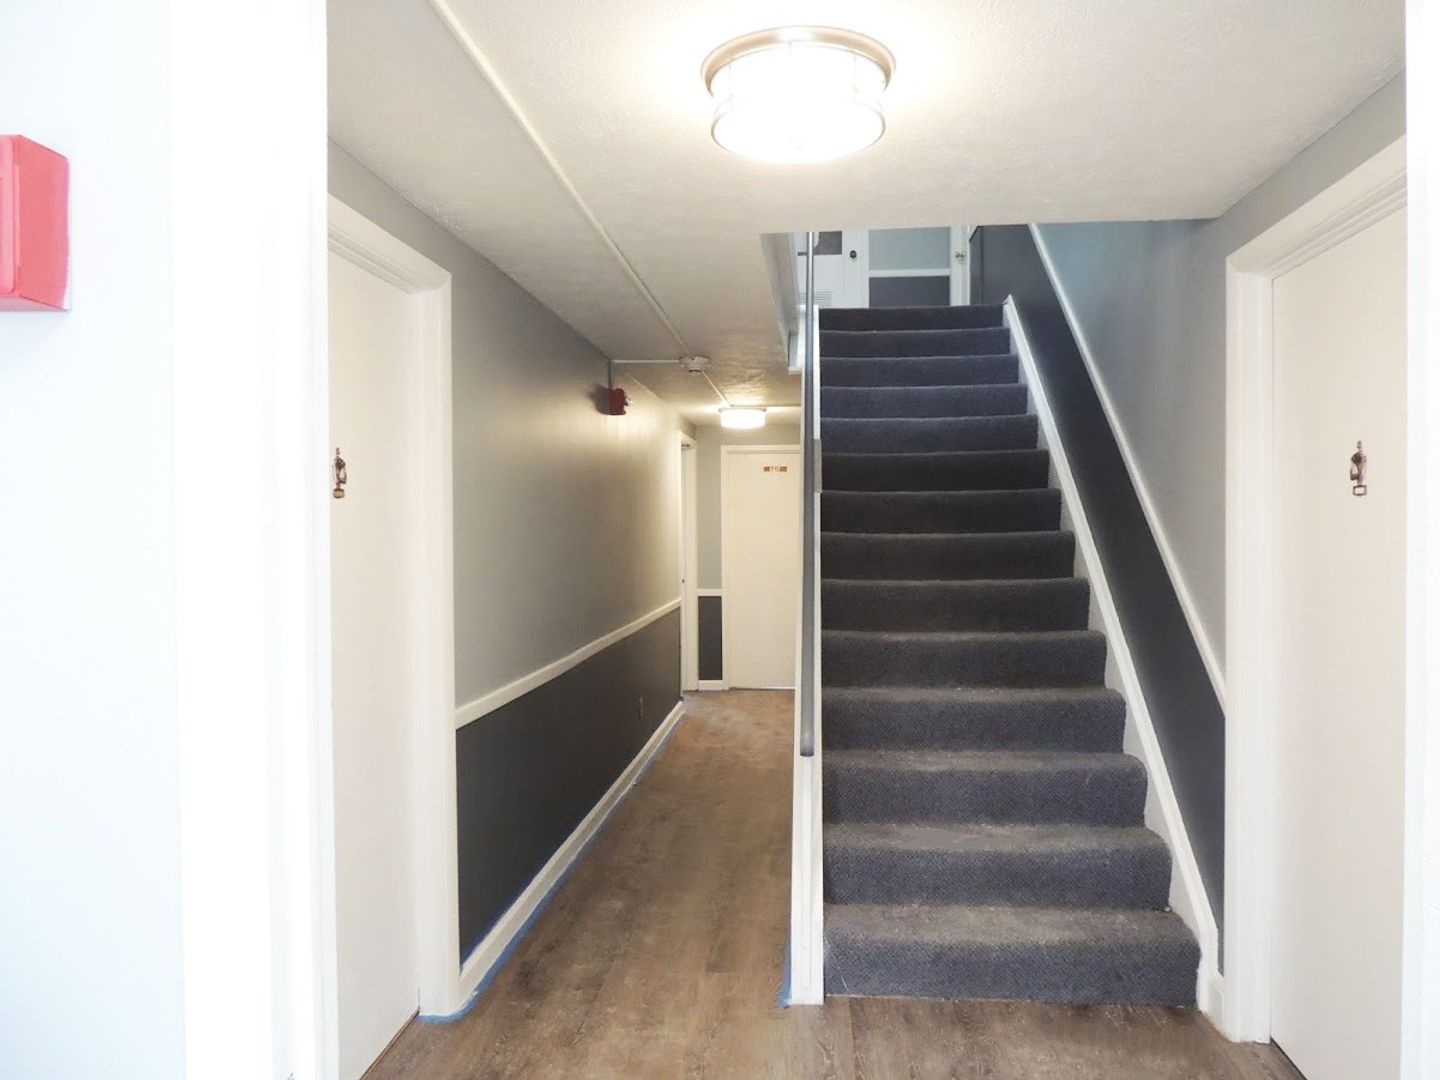 1 Bed – 1 Bath Apartment Units for Rent in Maple Heights | Ohio | Entirely Updated! #44137 Image